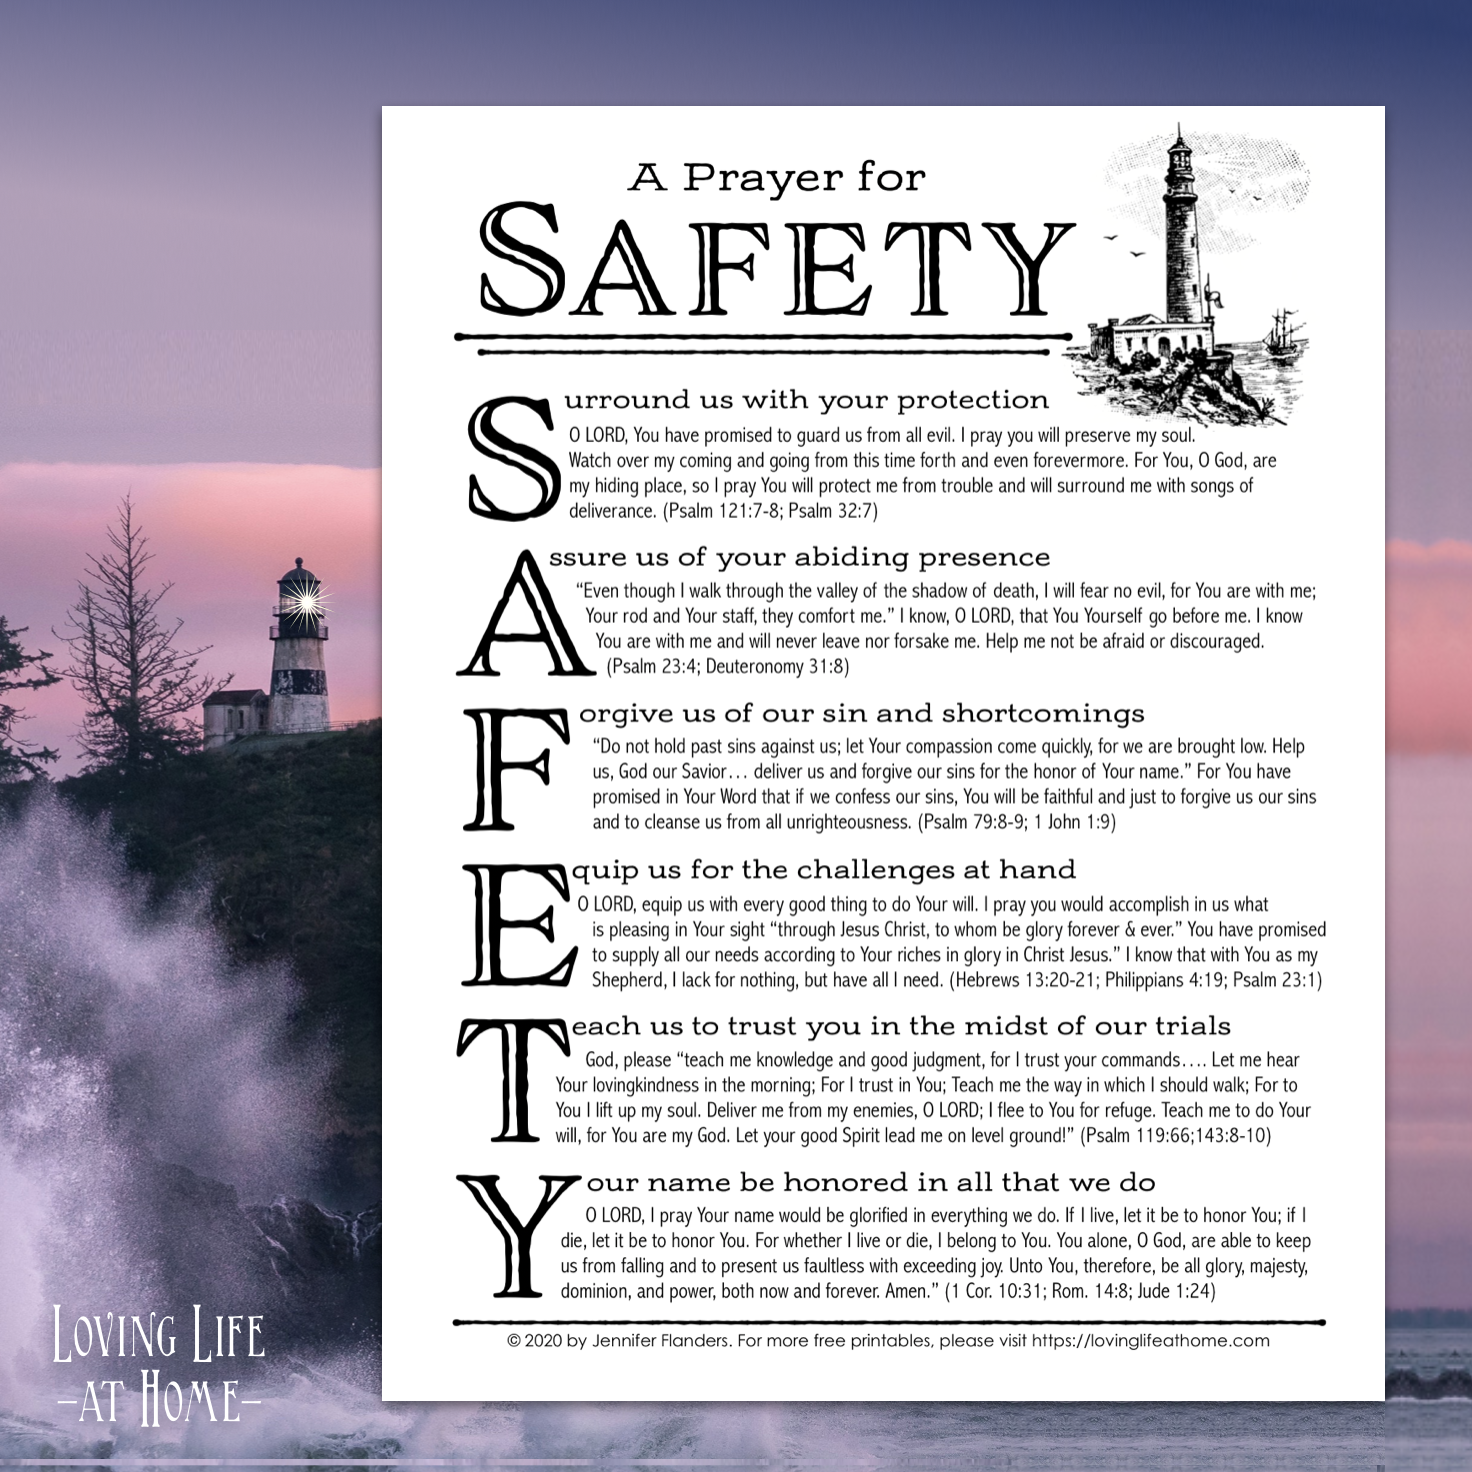 Prayer for Safety in the Midst of Danger